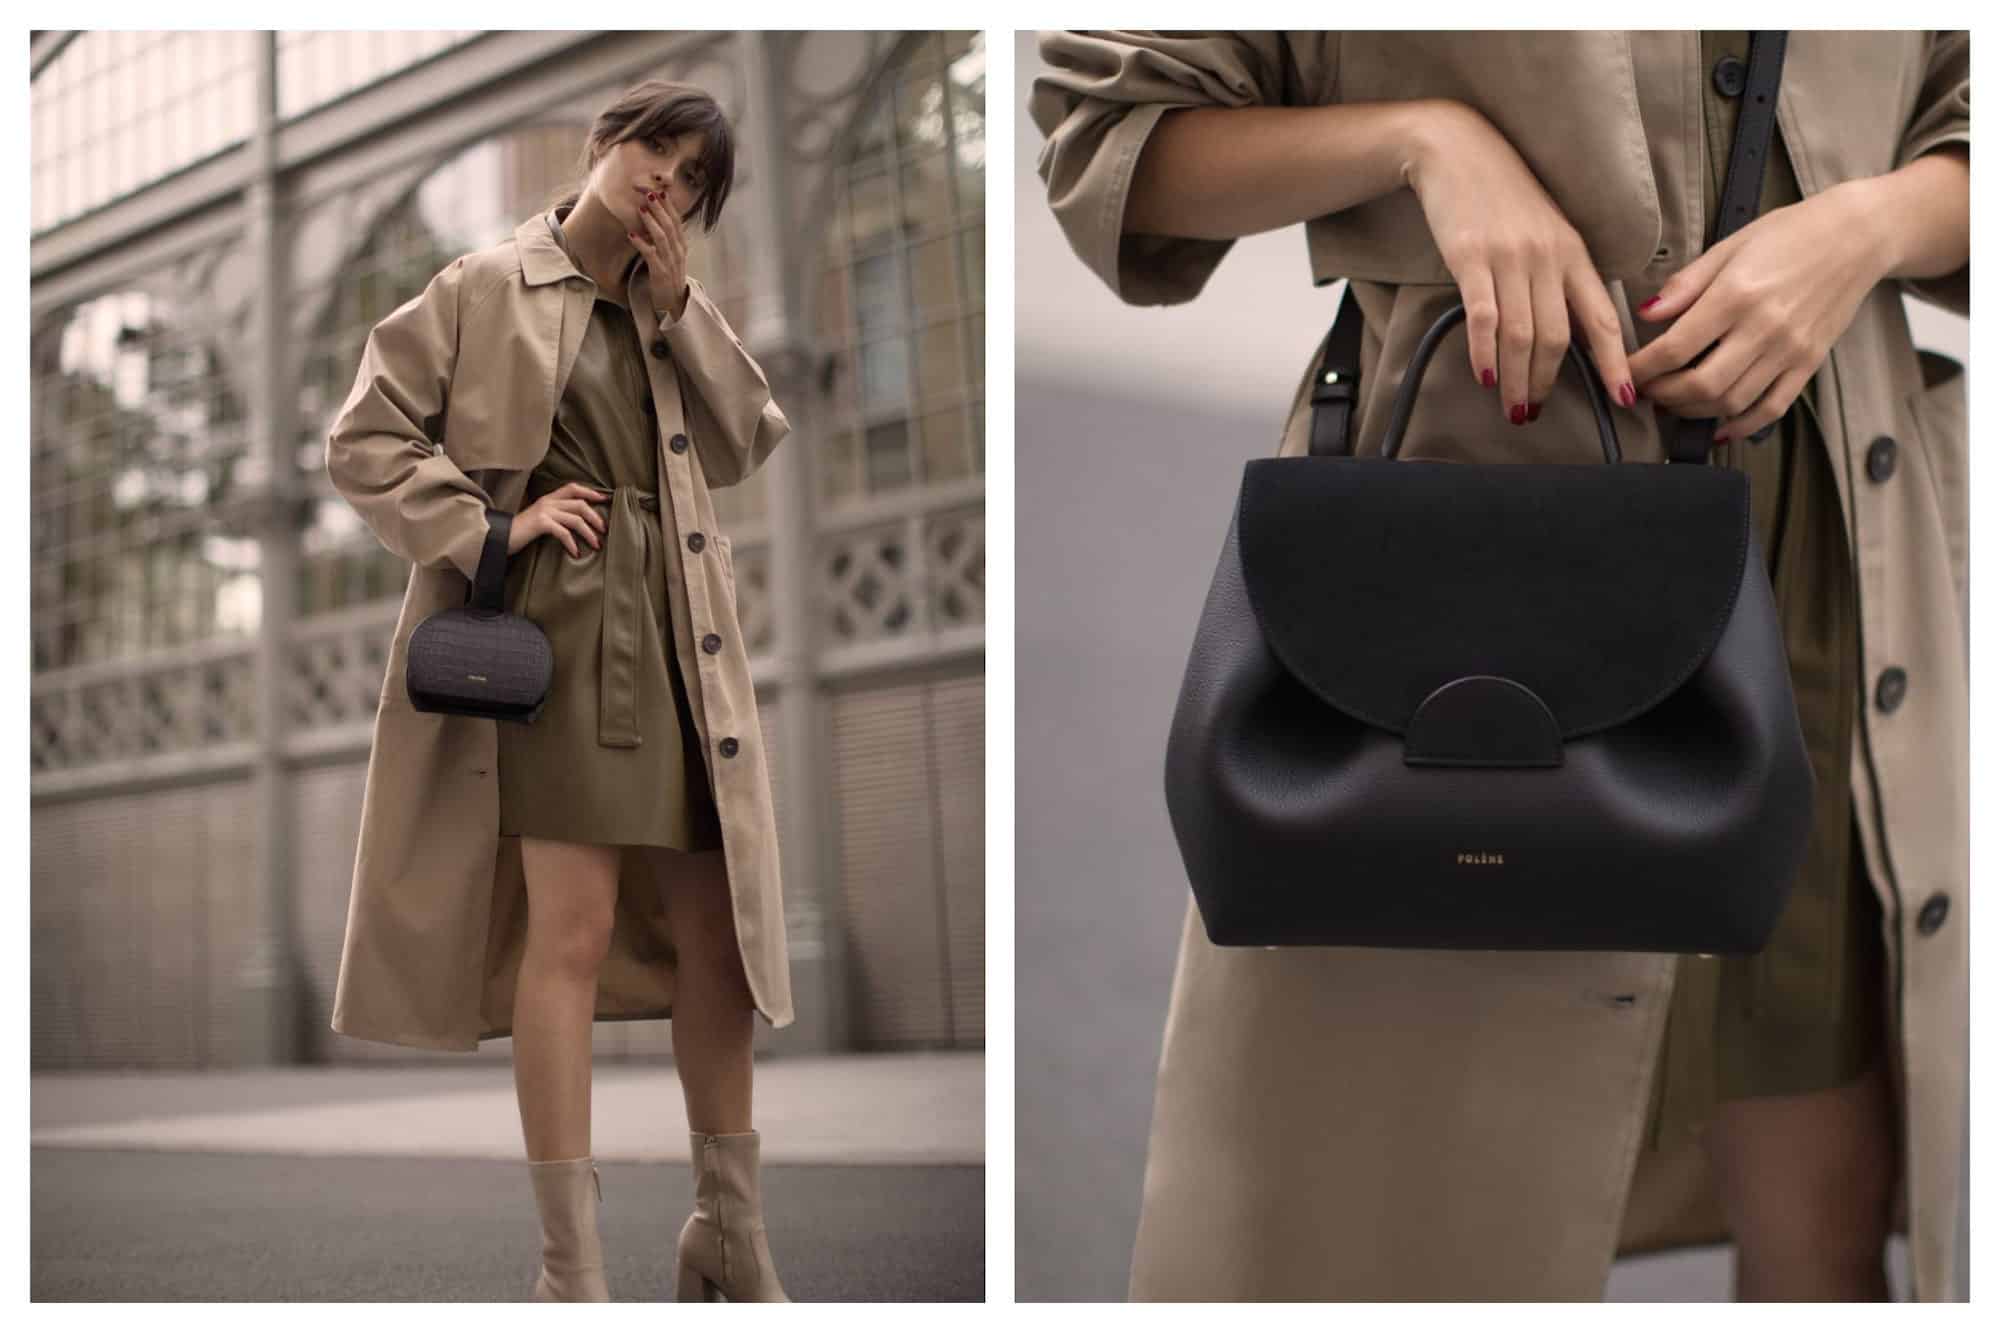 A Polène bag is the Parisian fashion essential, like this wrist bag (left) and well-cut black leather piece (right).